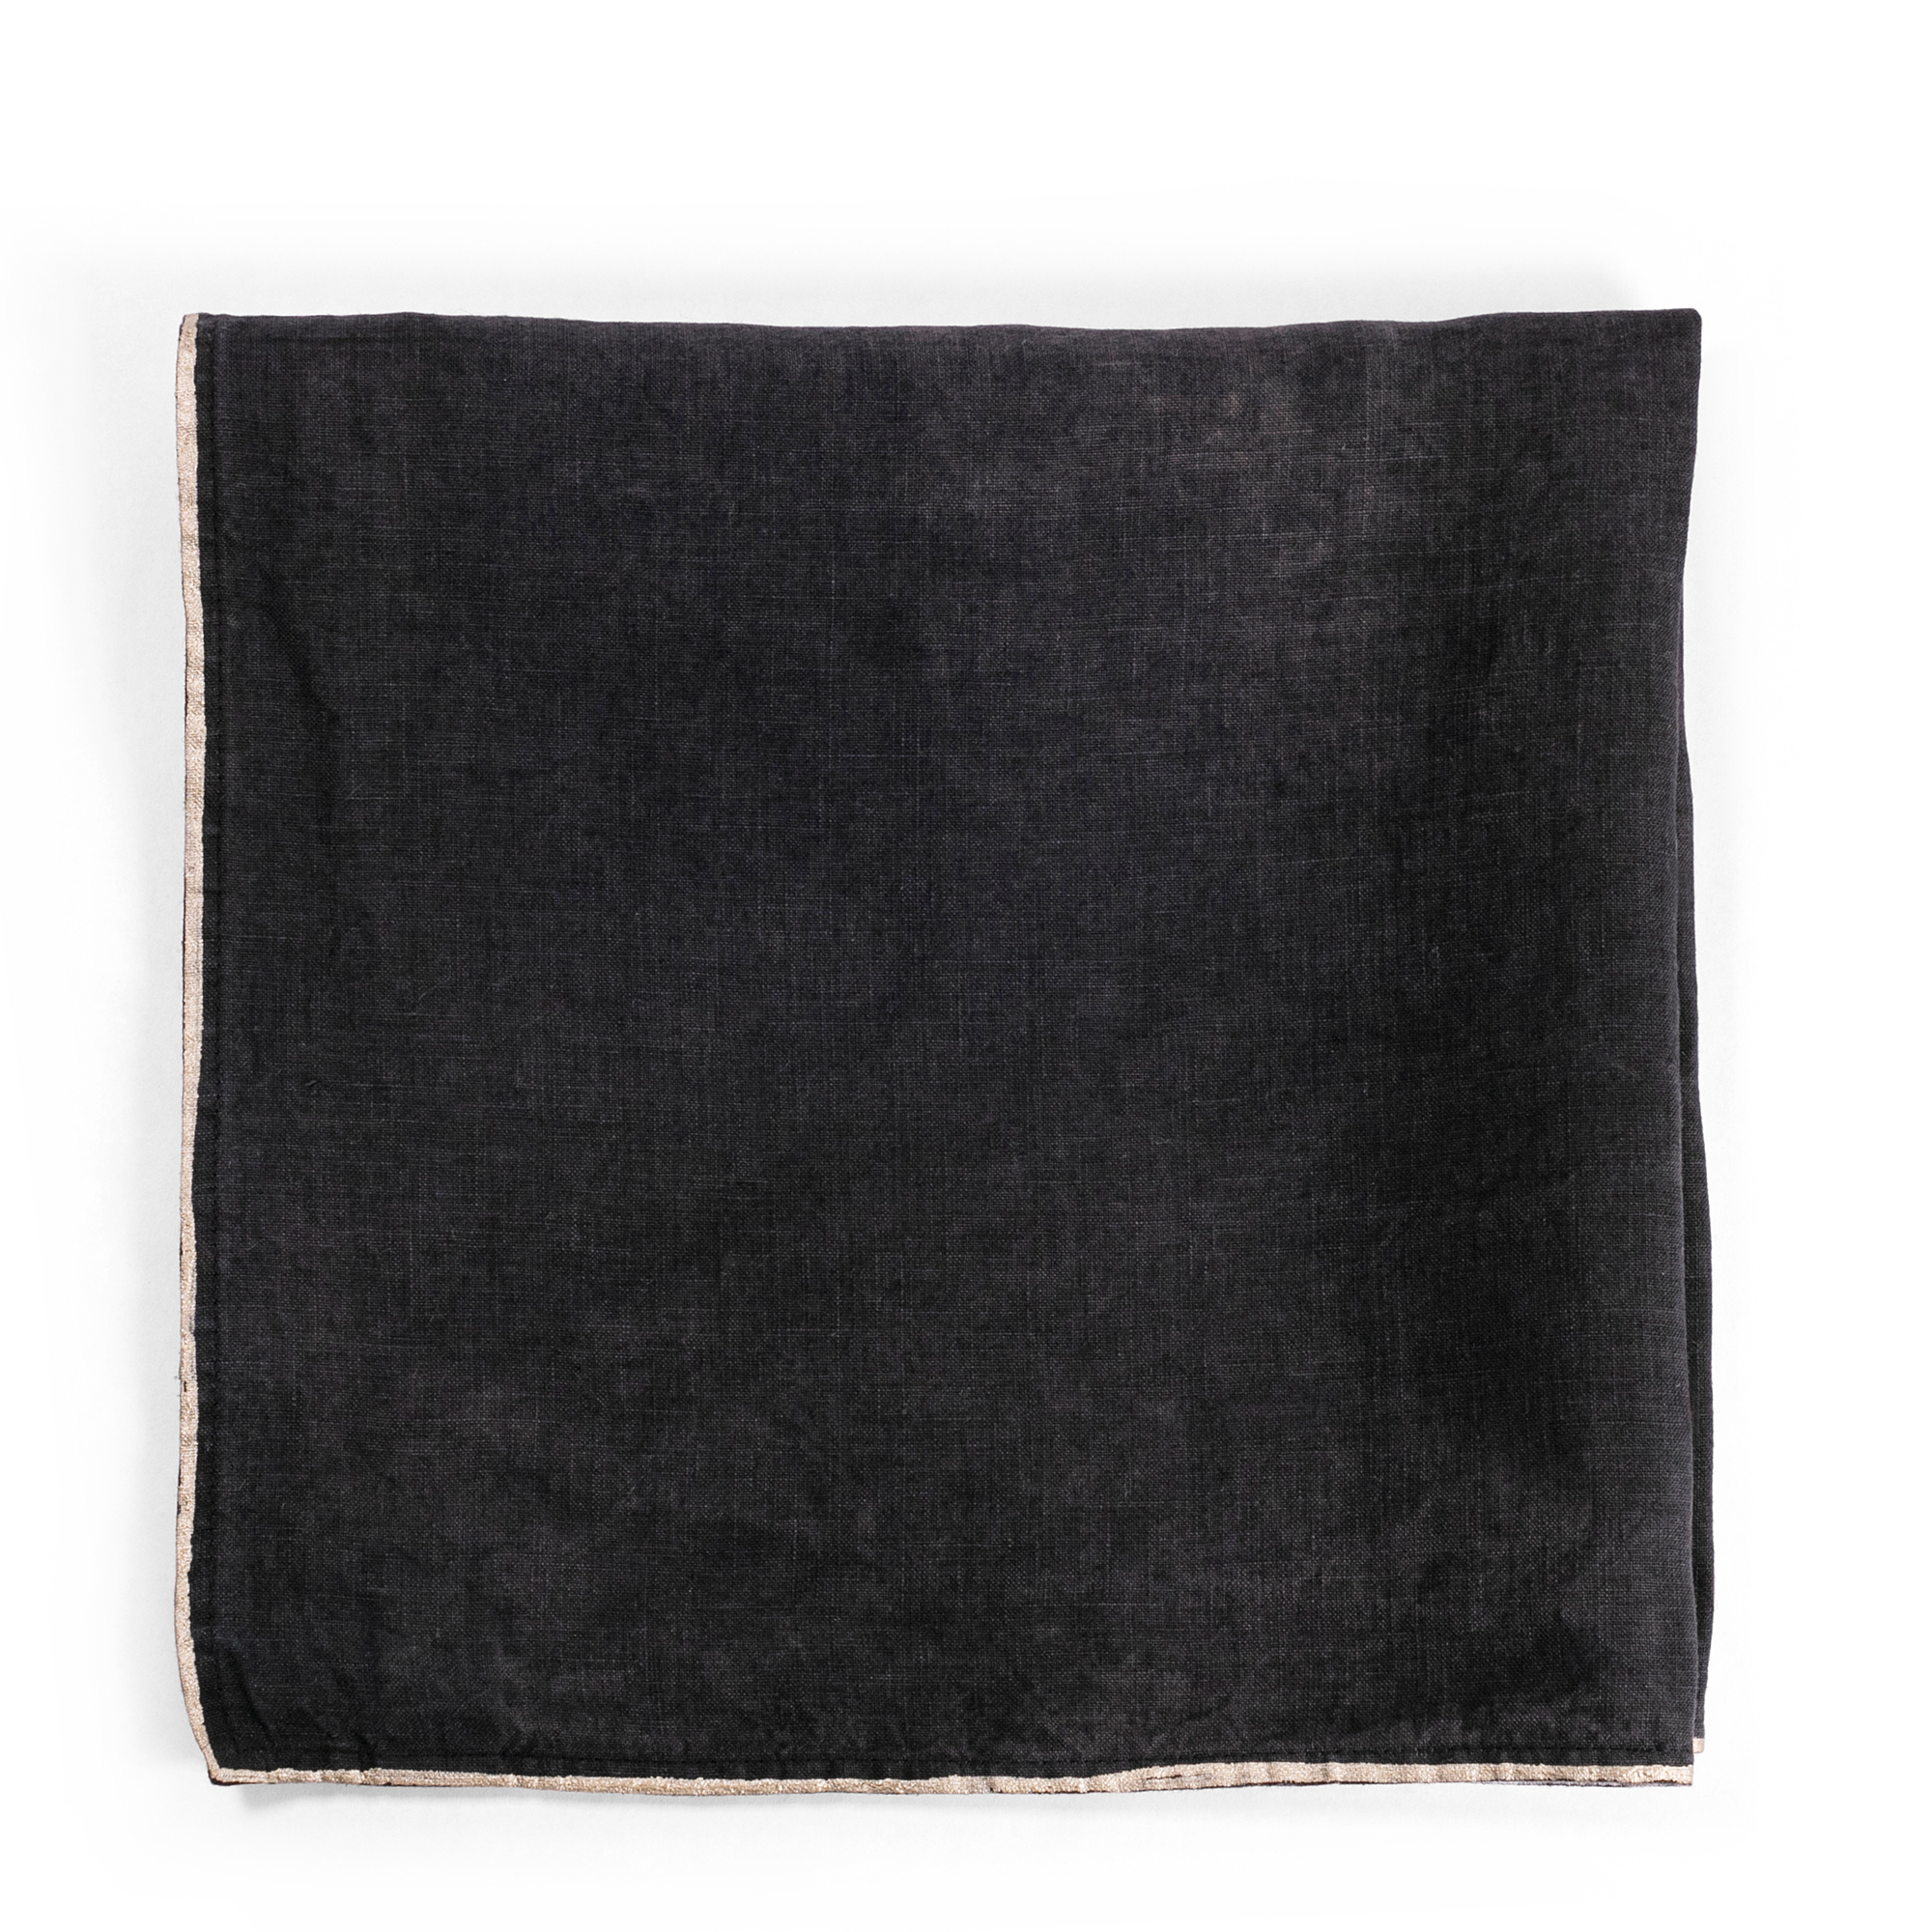 A luxurious black linen napkin with a gold-dipped edge, perfect for adding a touch of elegance and contrast to any table setting.